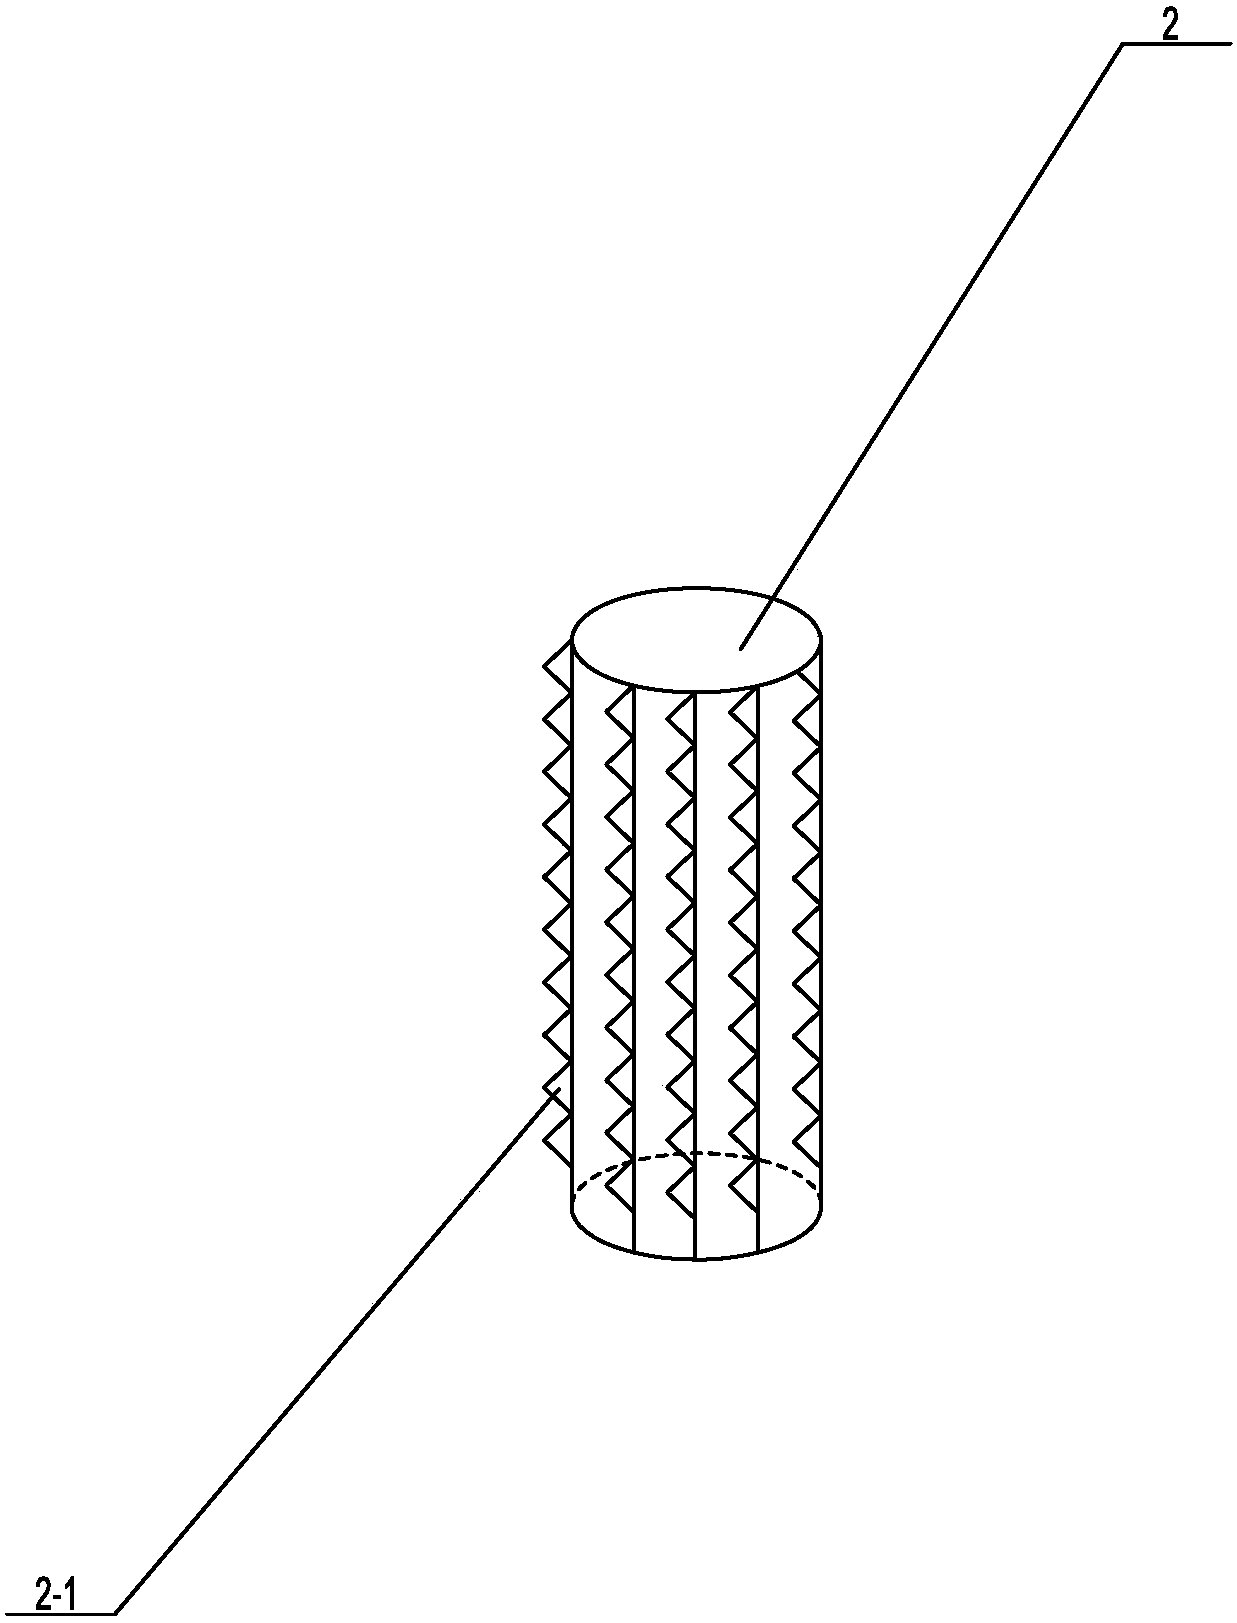 An automatic peeling device